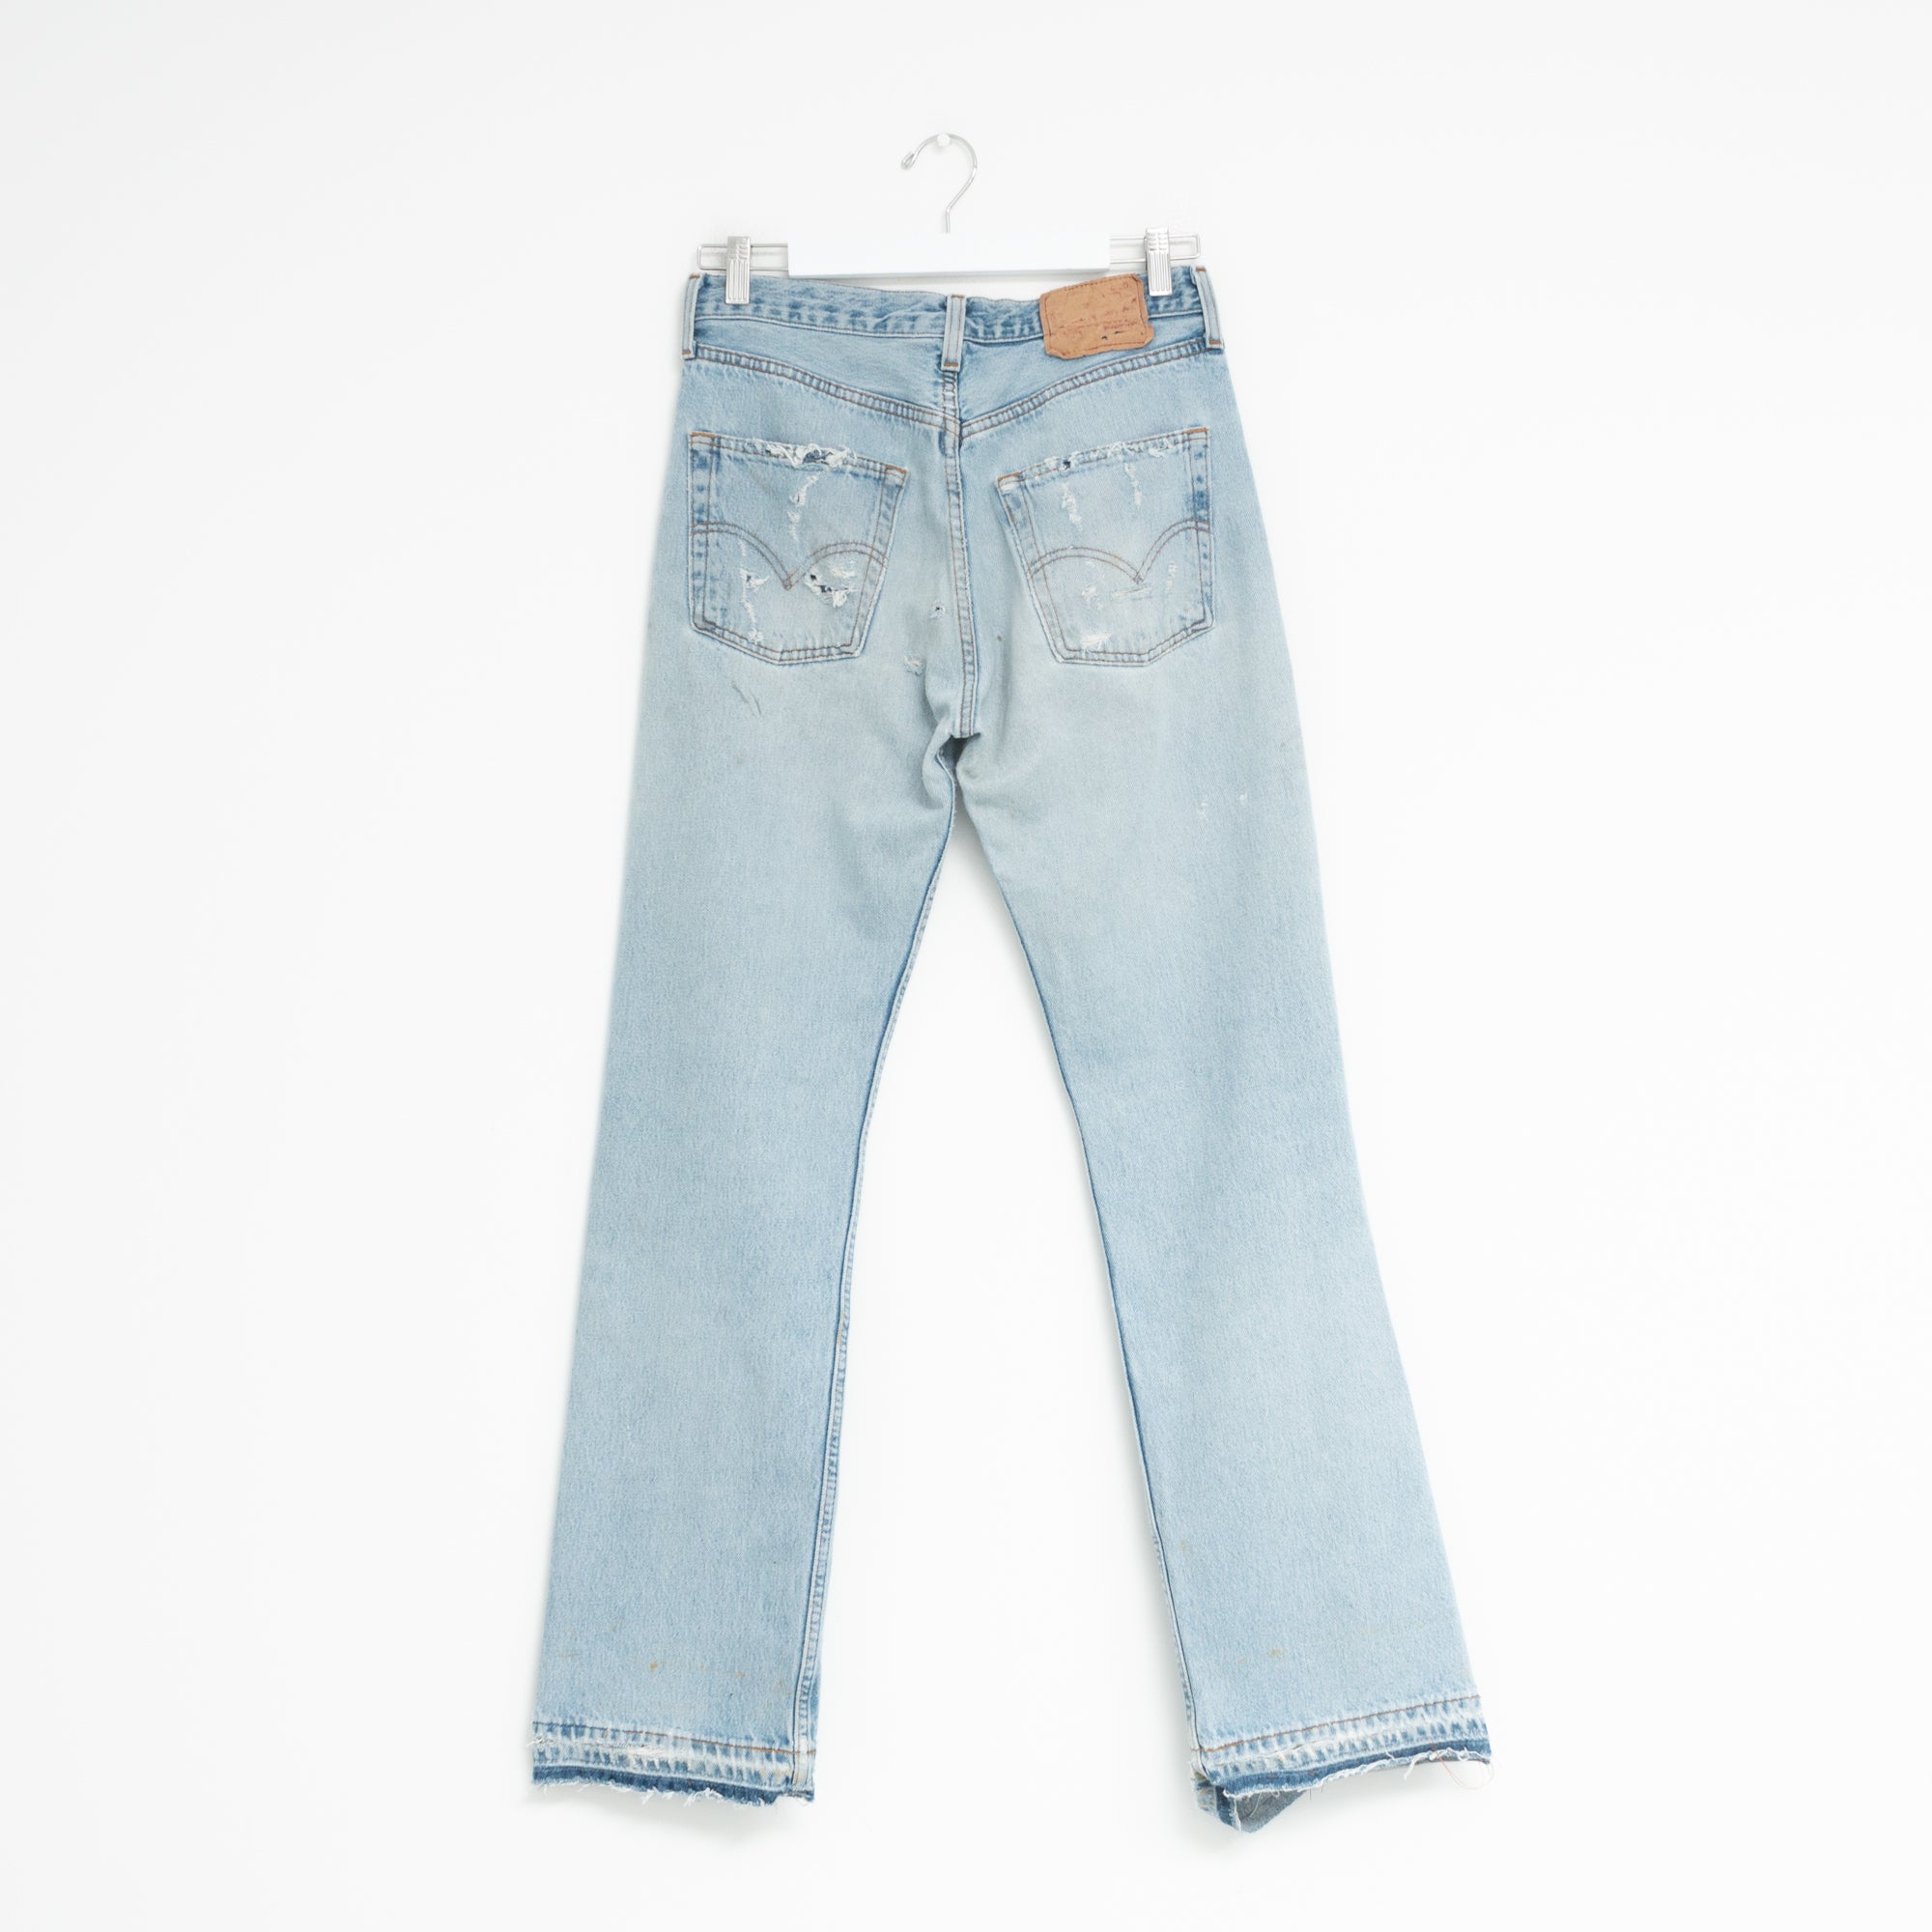 "LE FLARE" JEANS W30 L31